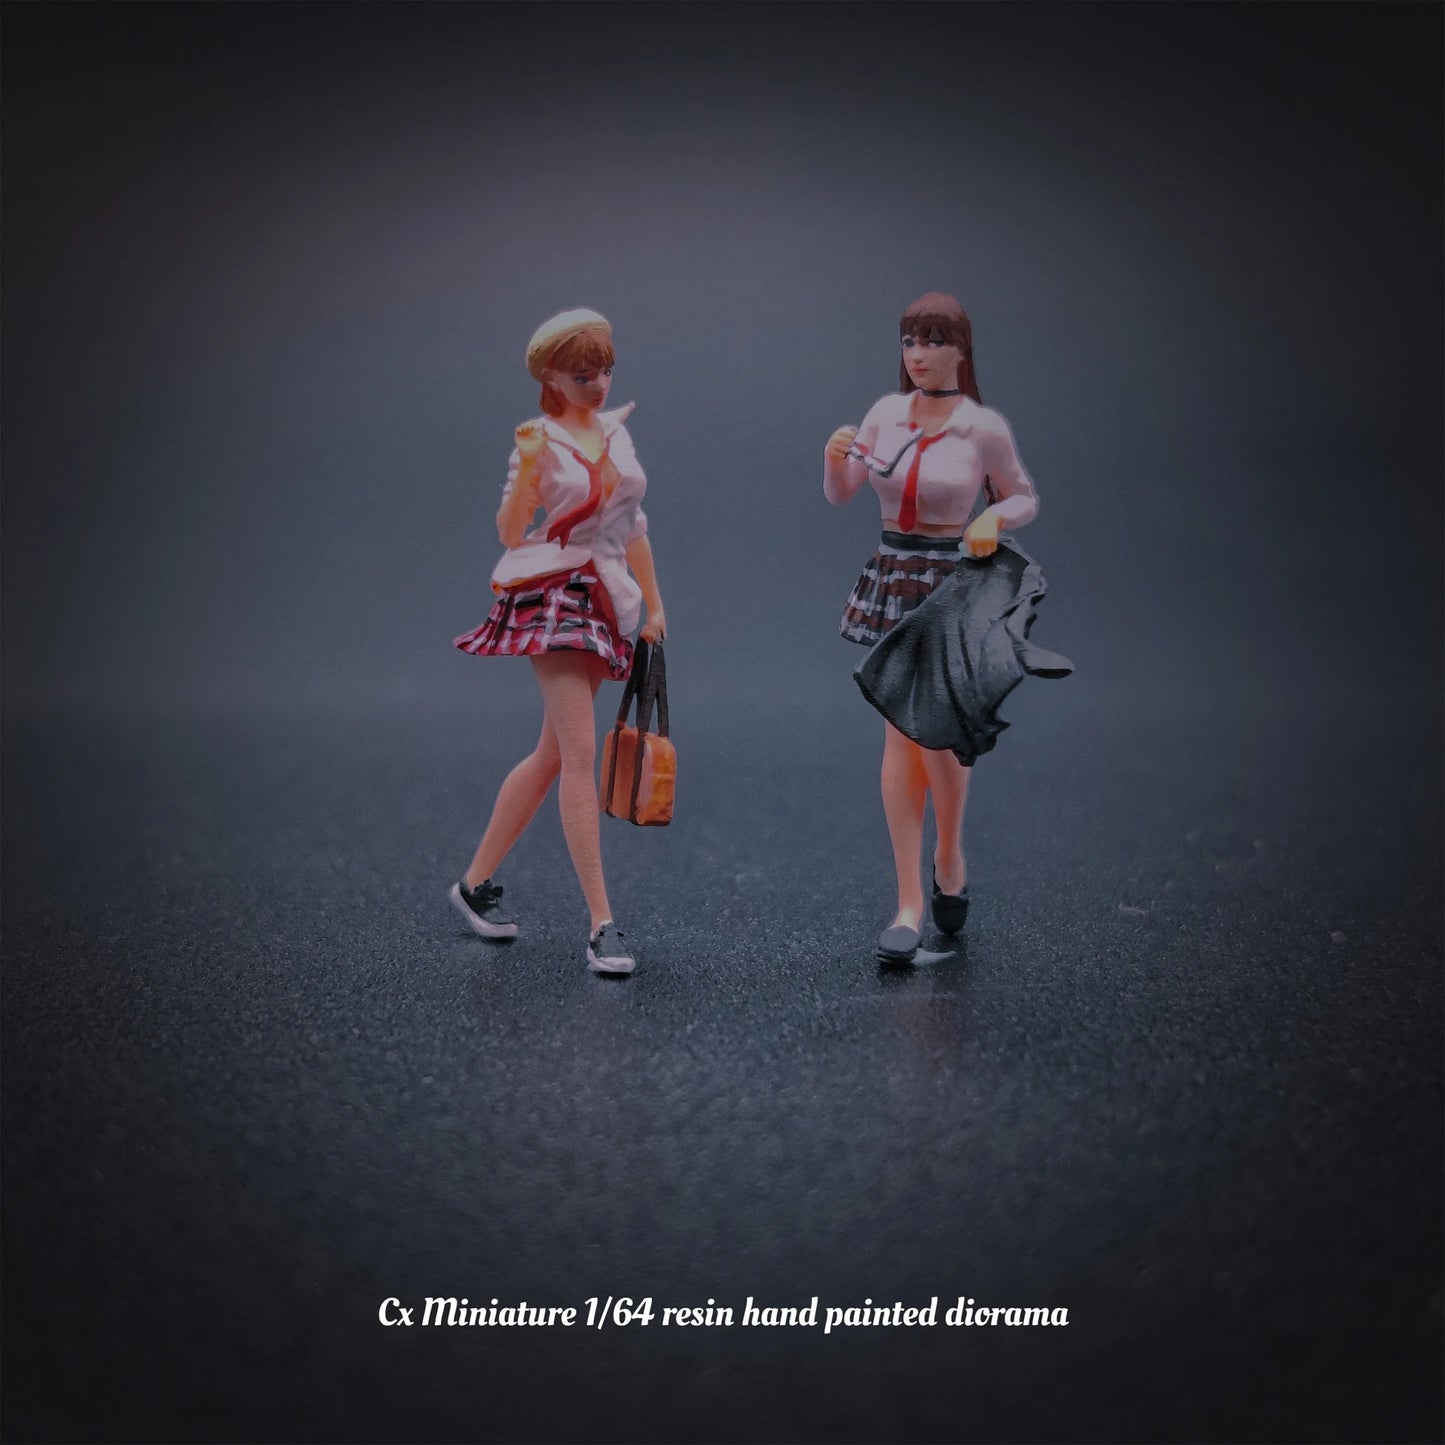 Cx Miniature Diorama 1/64 Scale Figurines Model Realistic Portrayal of JK Dress Duo Collection Miniature Hand-painted